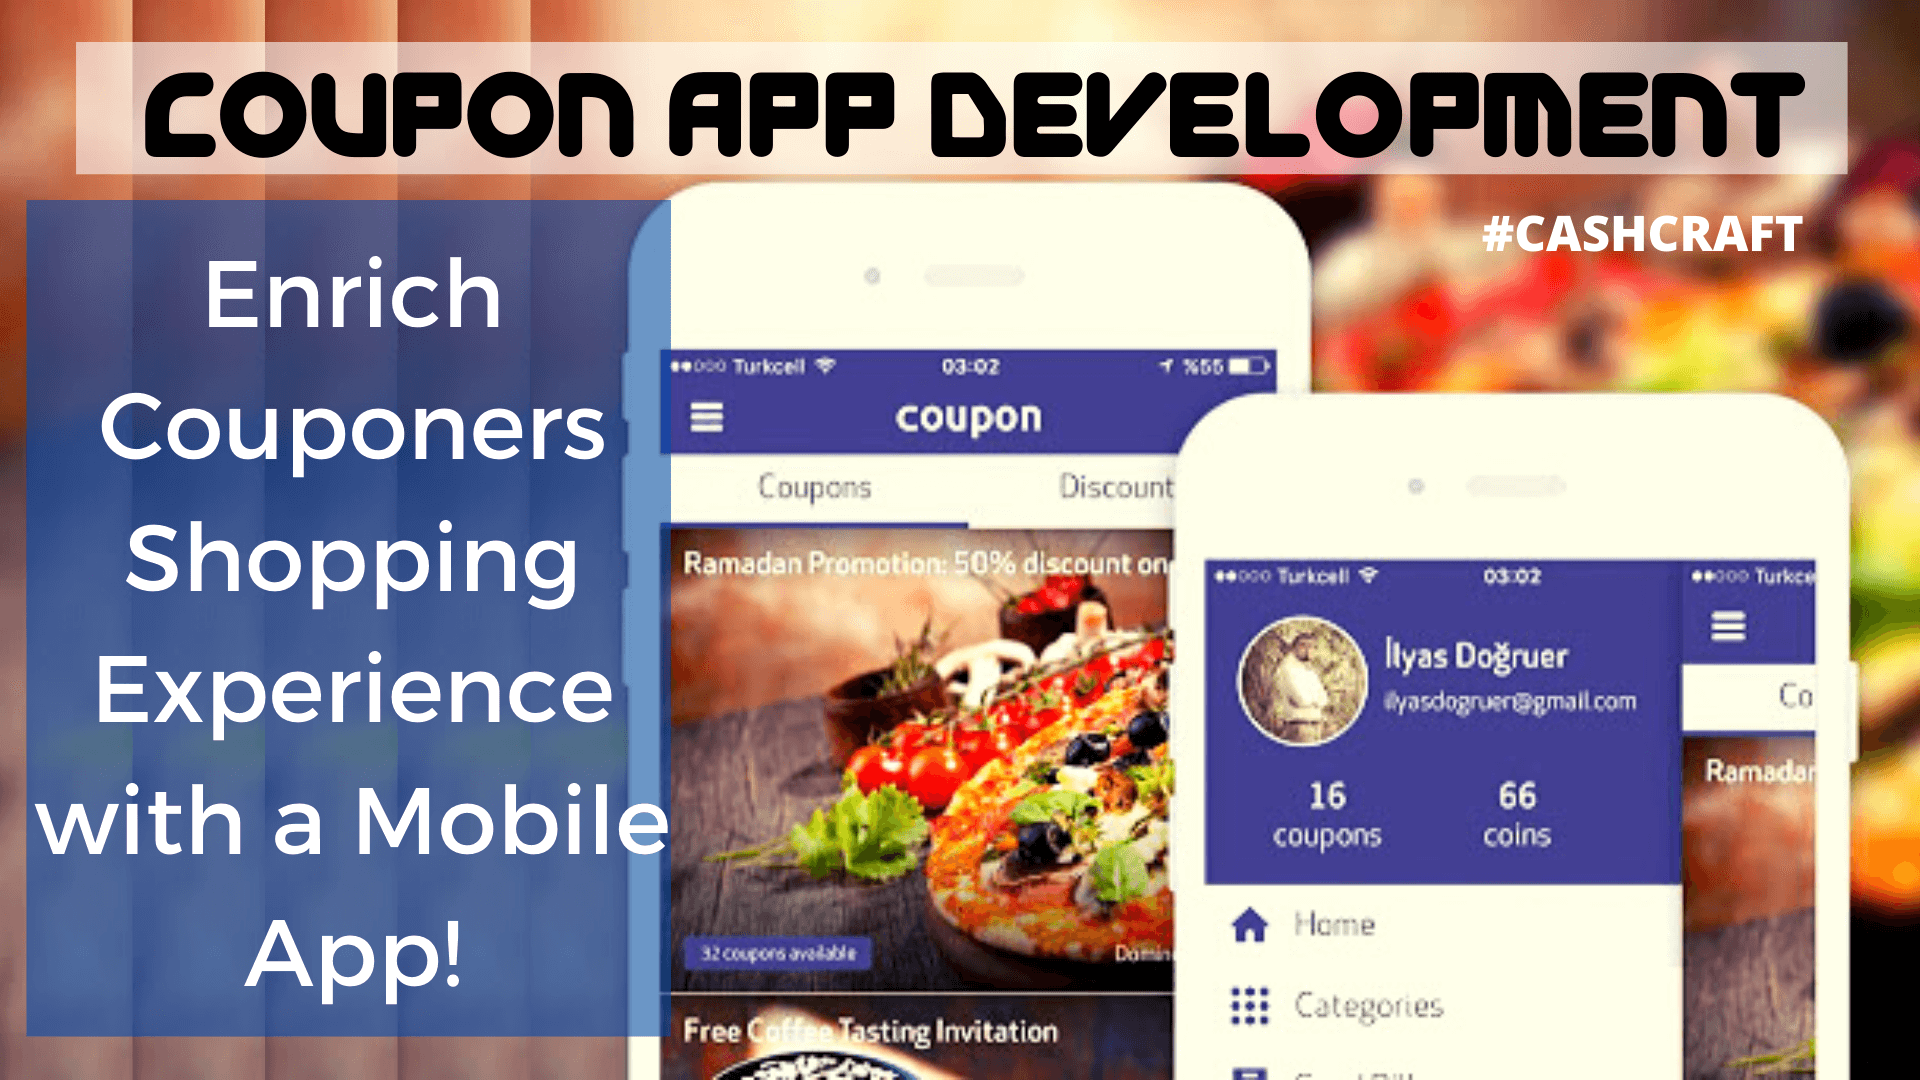 Coupon App Development - Enrich Couponers Shopping Experience